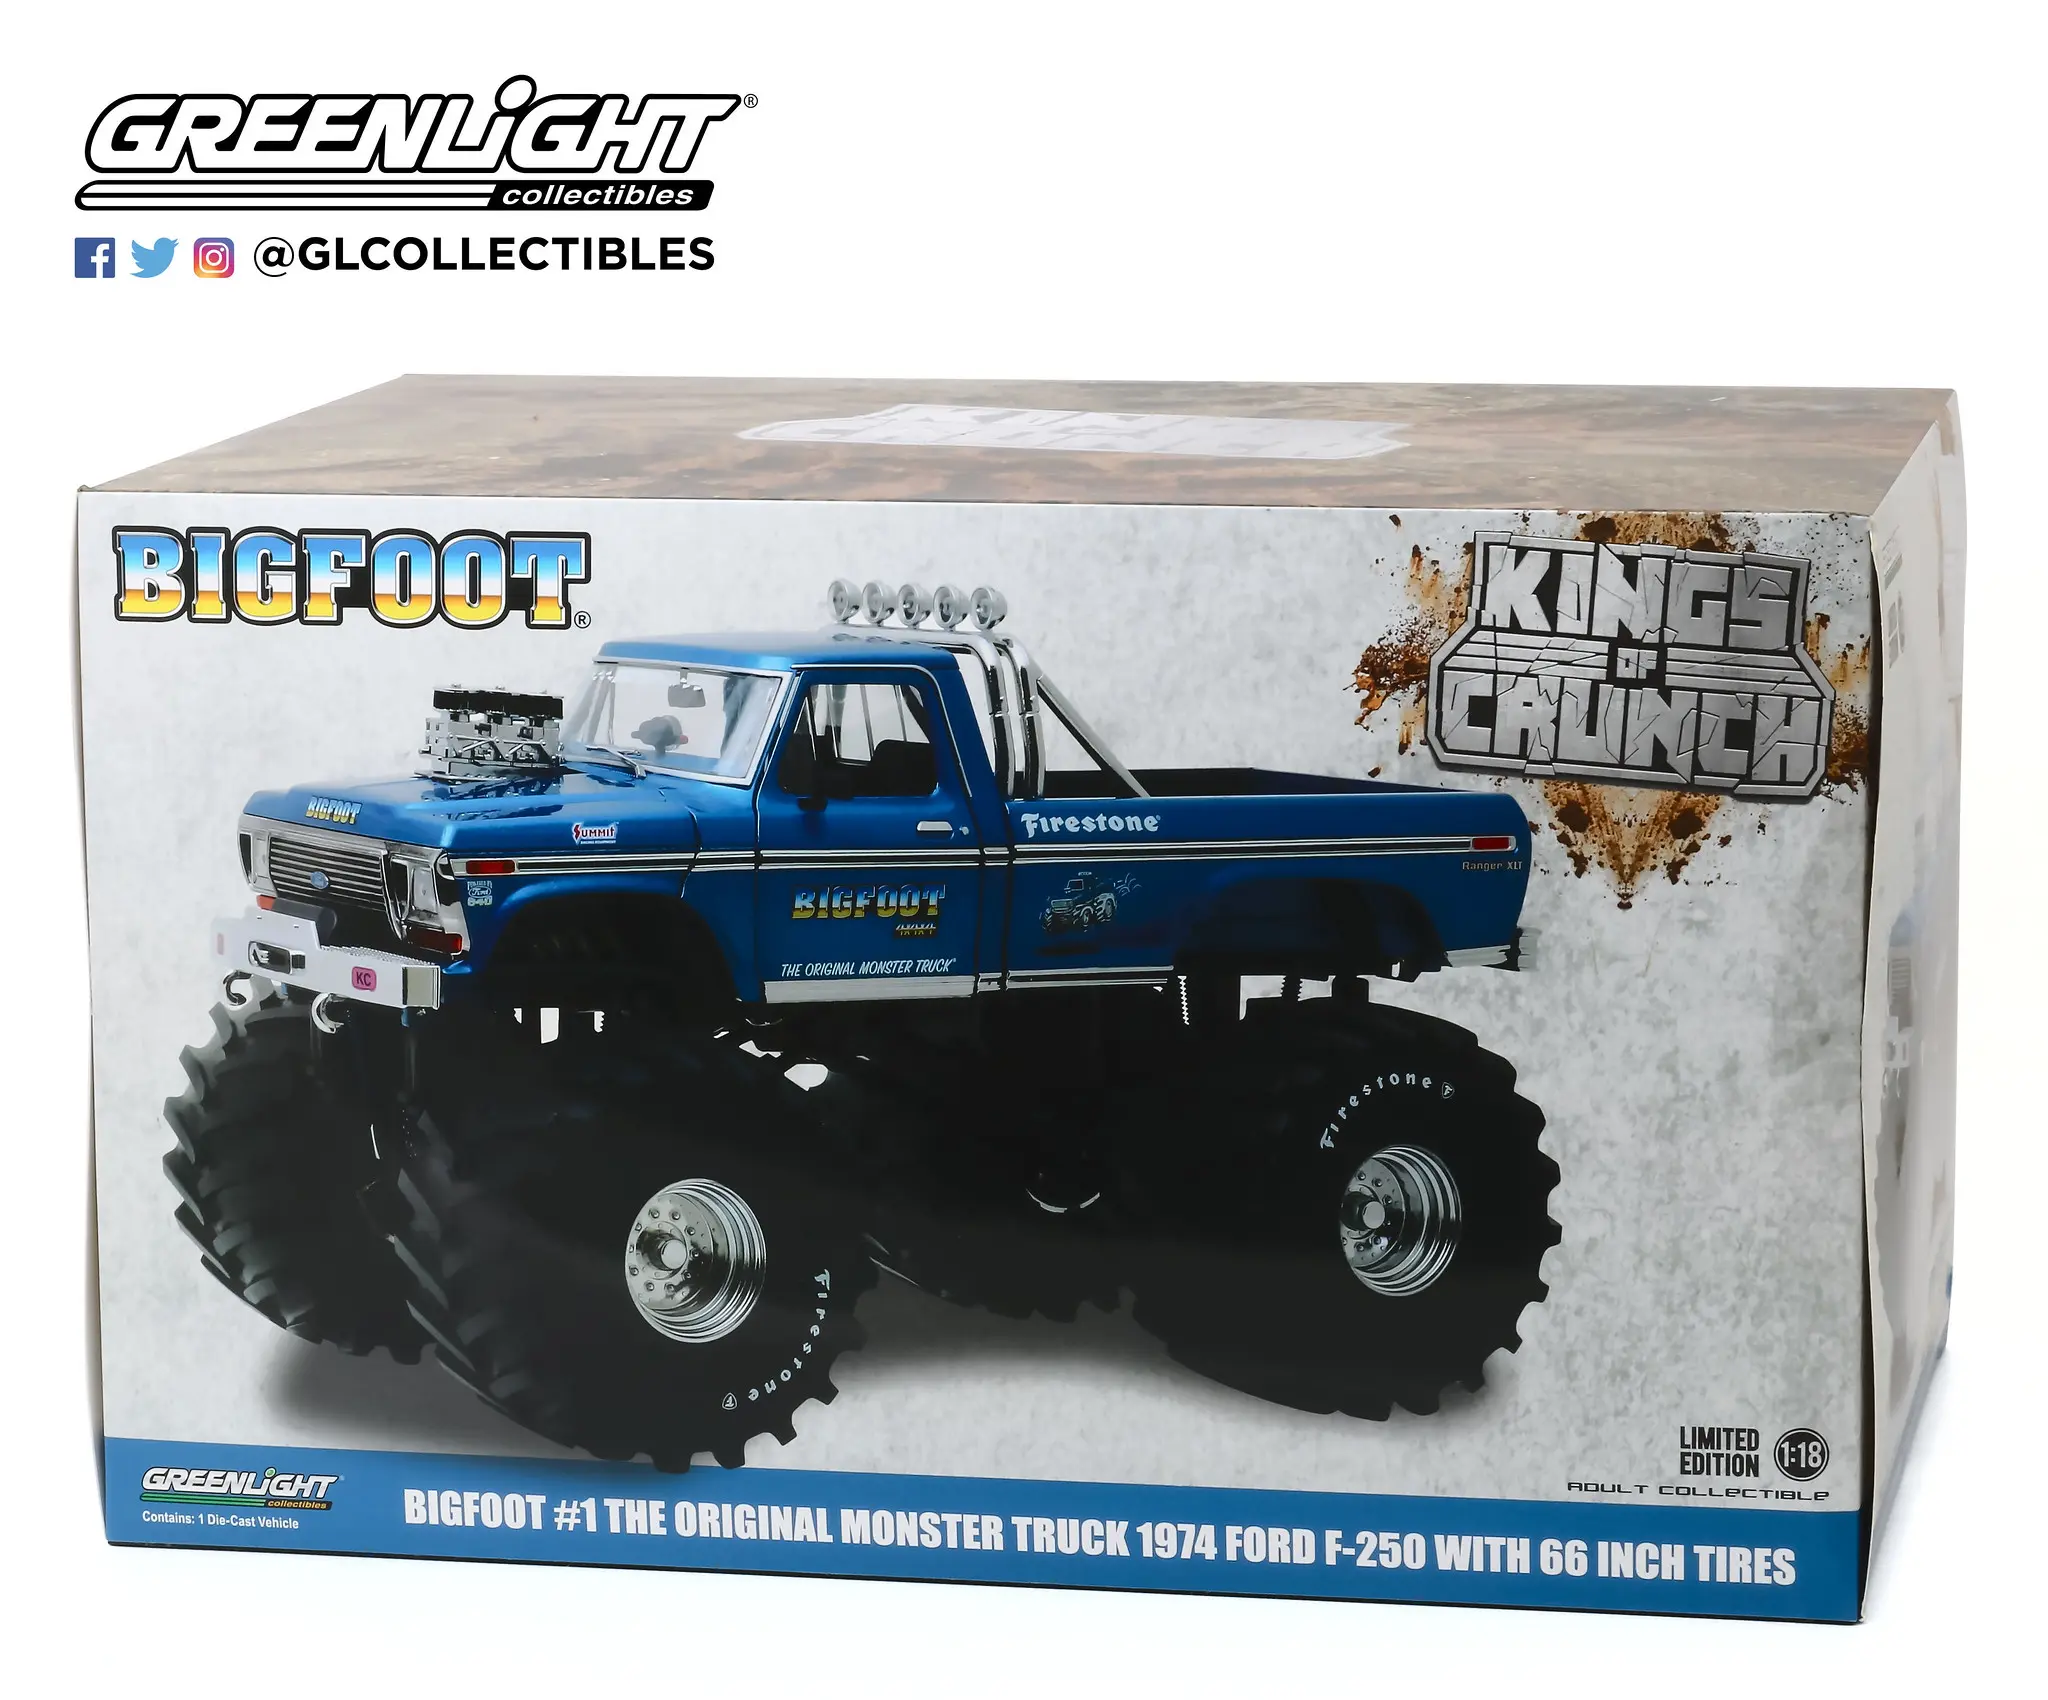 Bigfoot #1 - 1974 Ford F-250 Monster Truck with 66